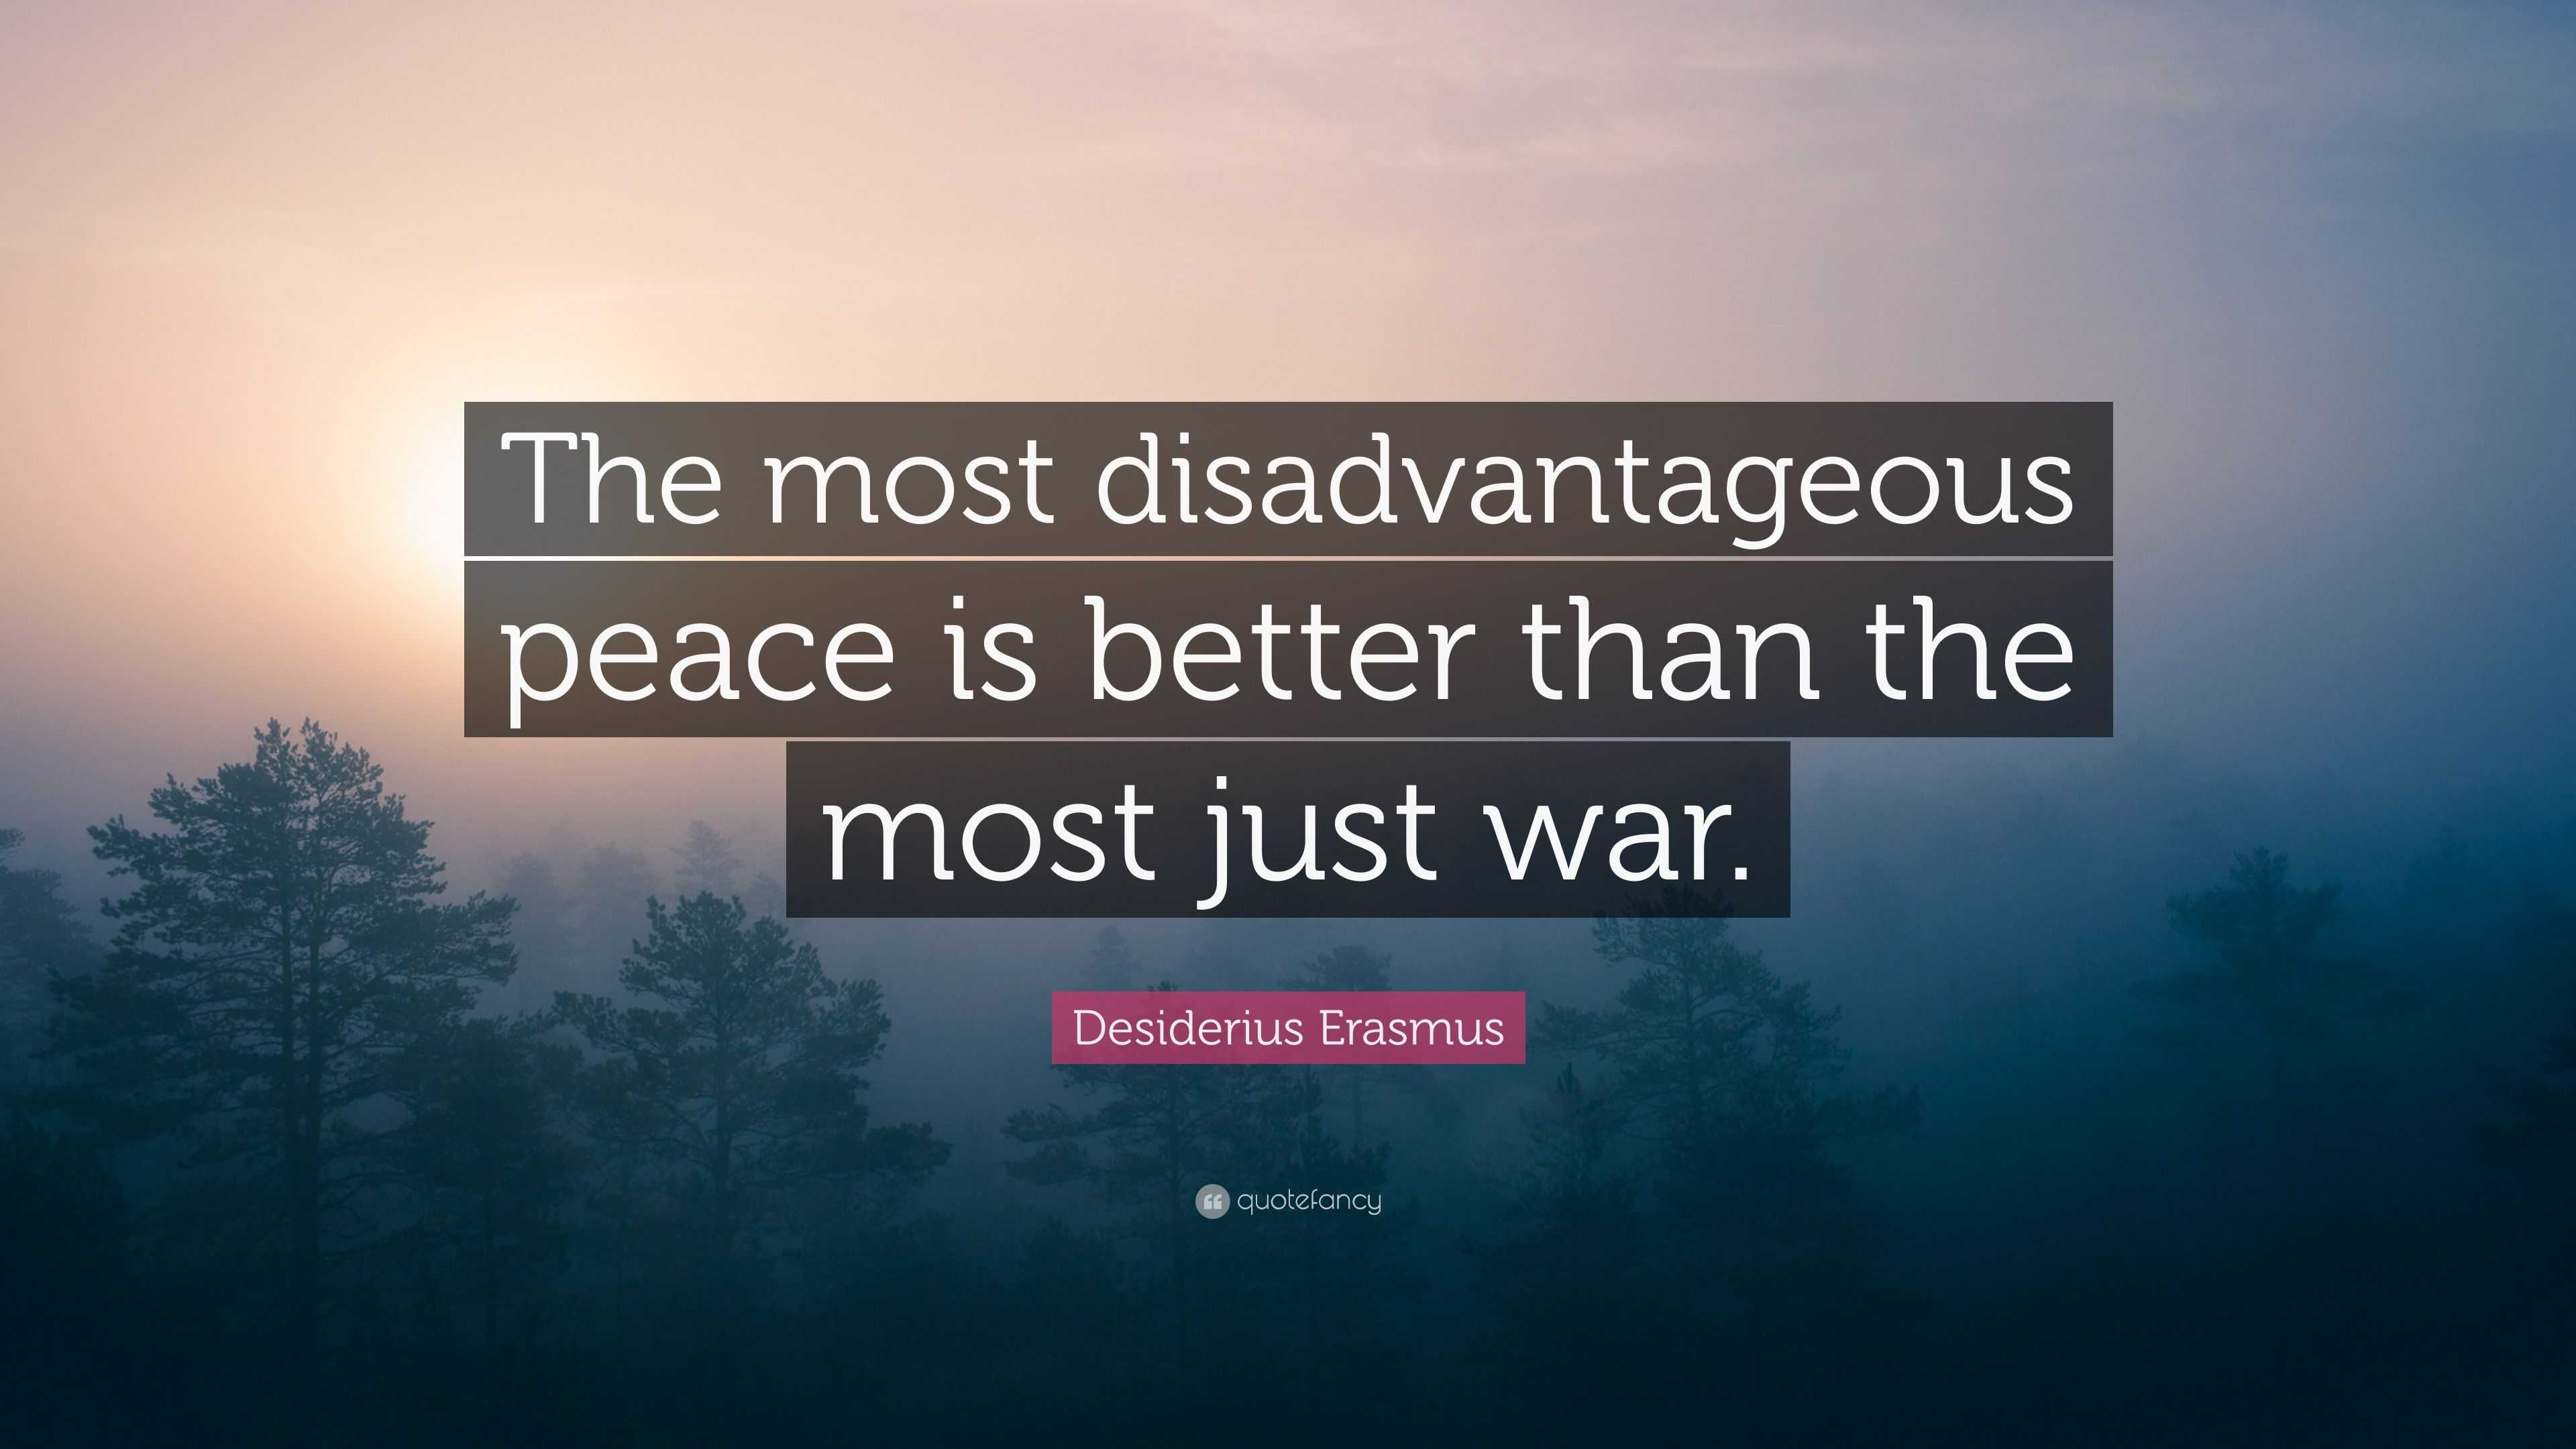 Desiderius Erasmus Quote: “The most disadvantageous peace is better ...